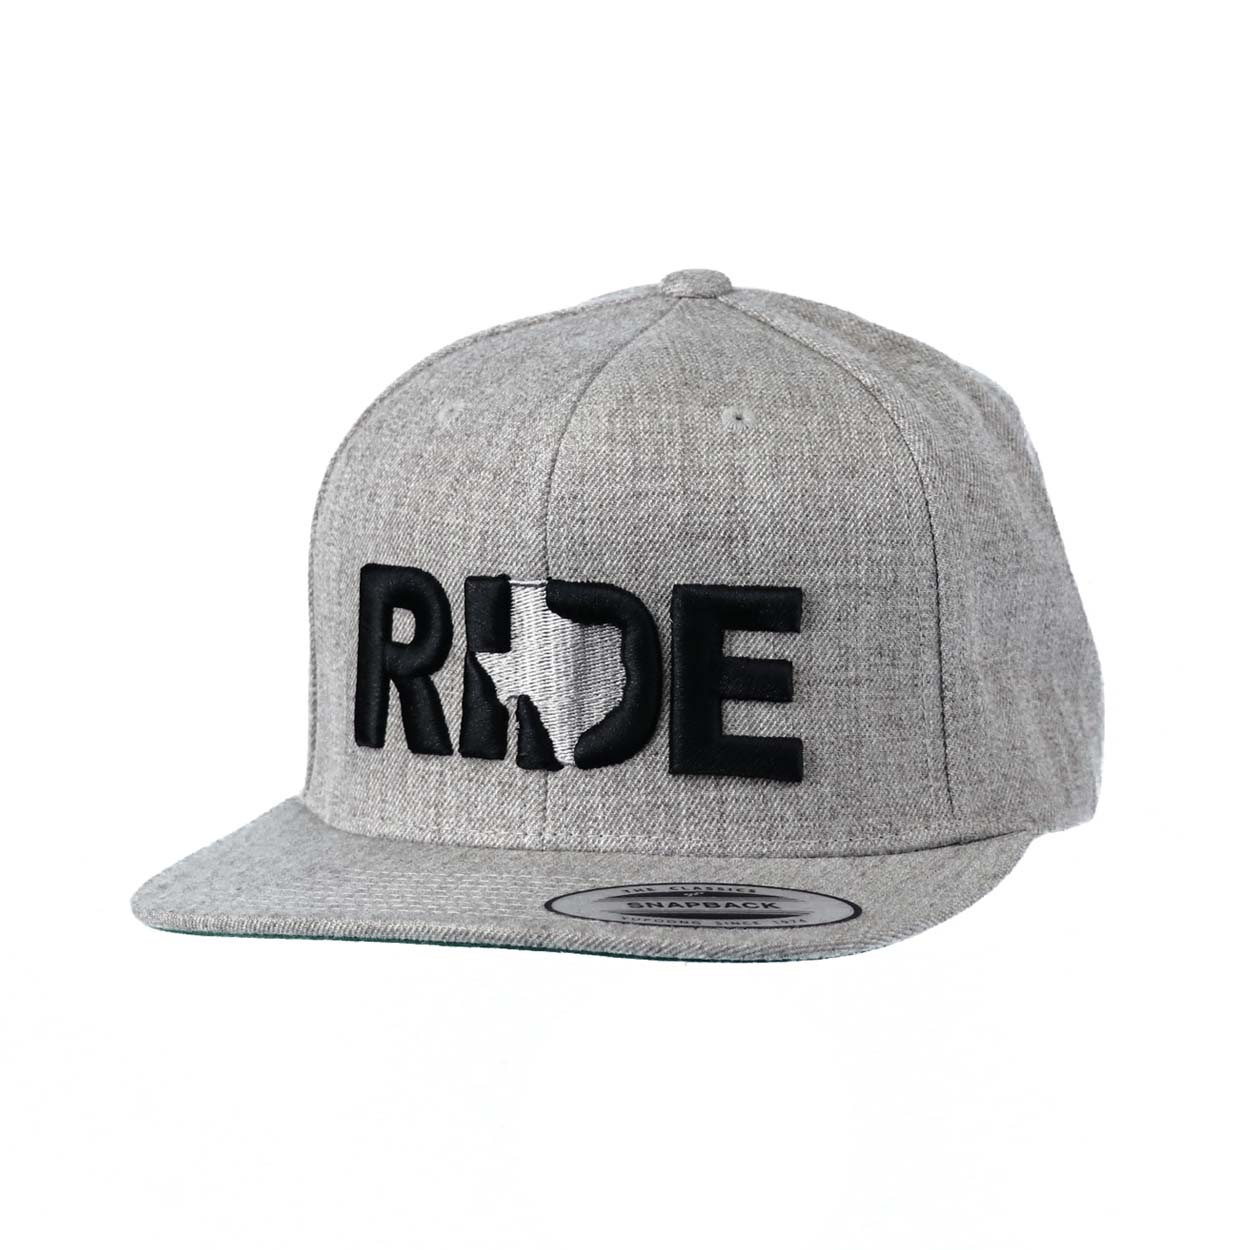 Ride Texas Classic Embroidered Snapback Flat Brim Hat Heather Gray